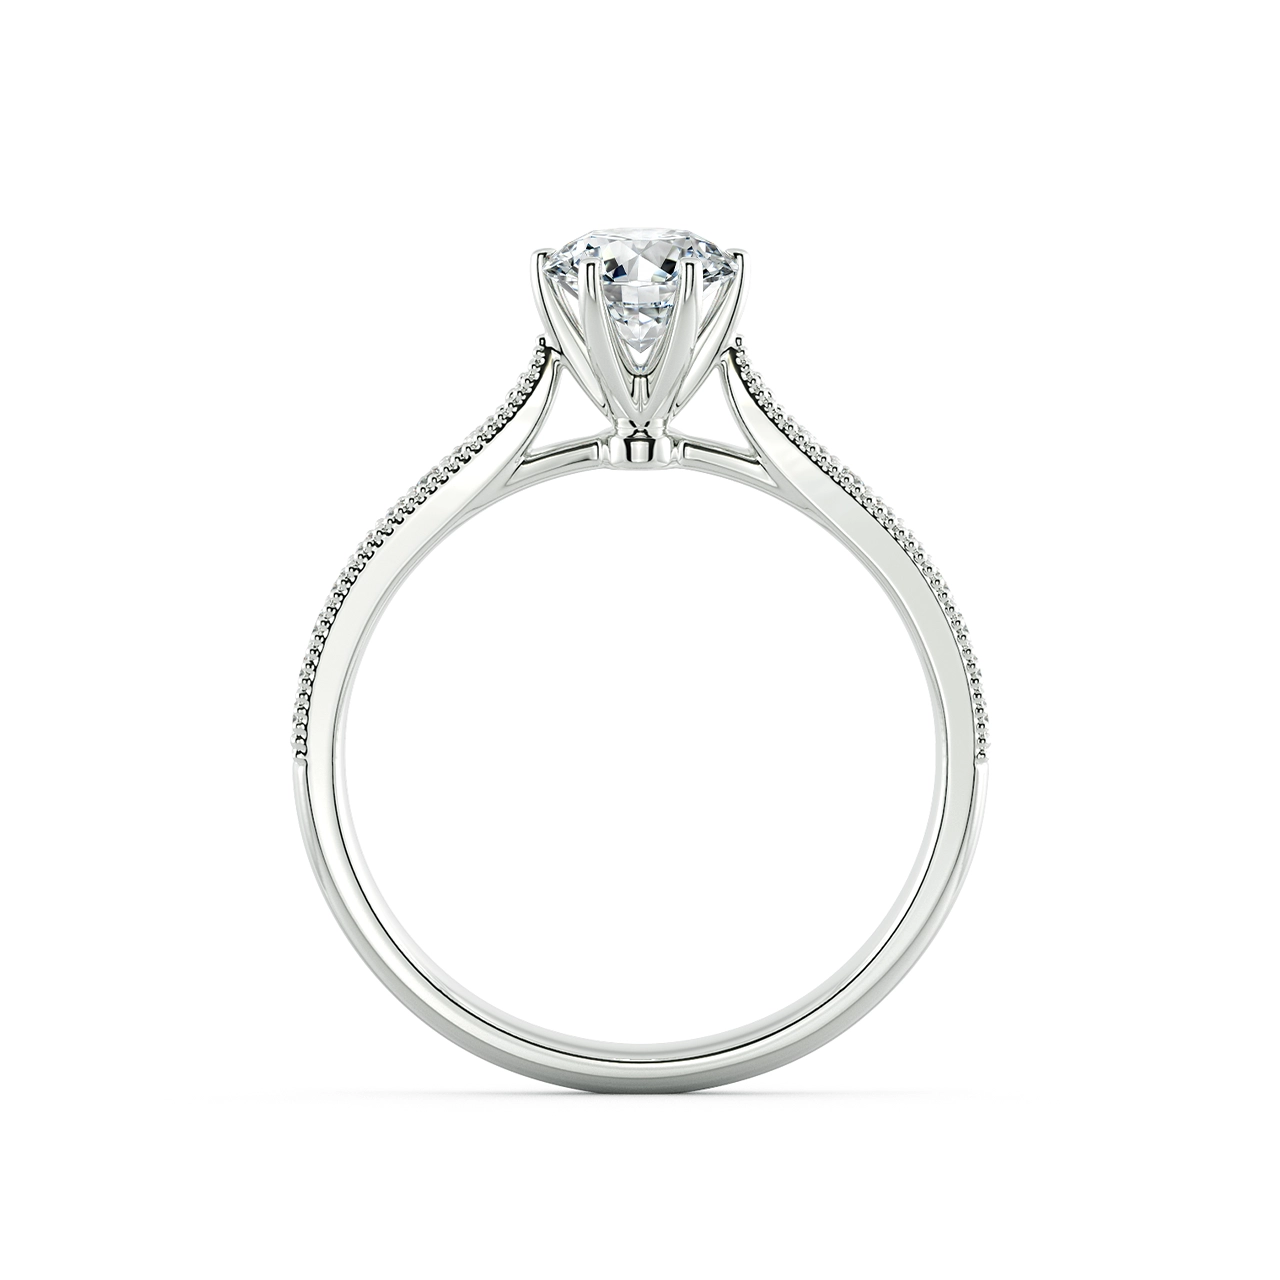 Six Prongs Solitaire Pave Engagement Ring with Milgrain NCH1204 5